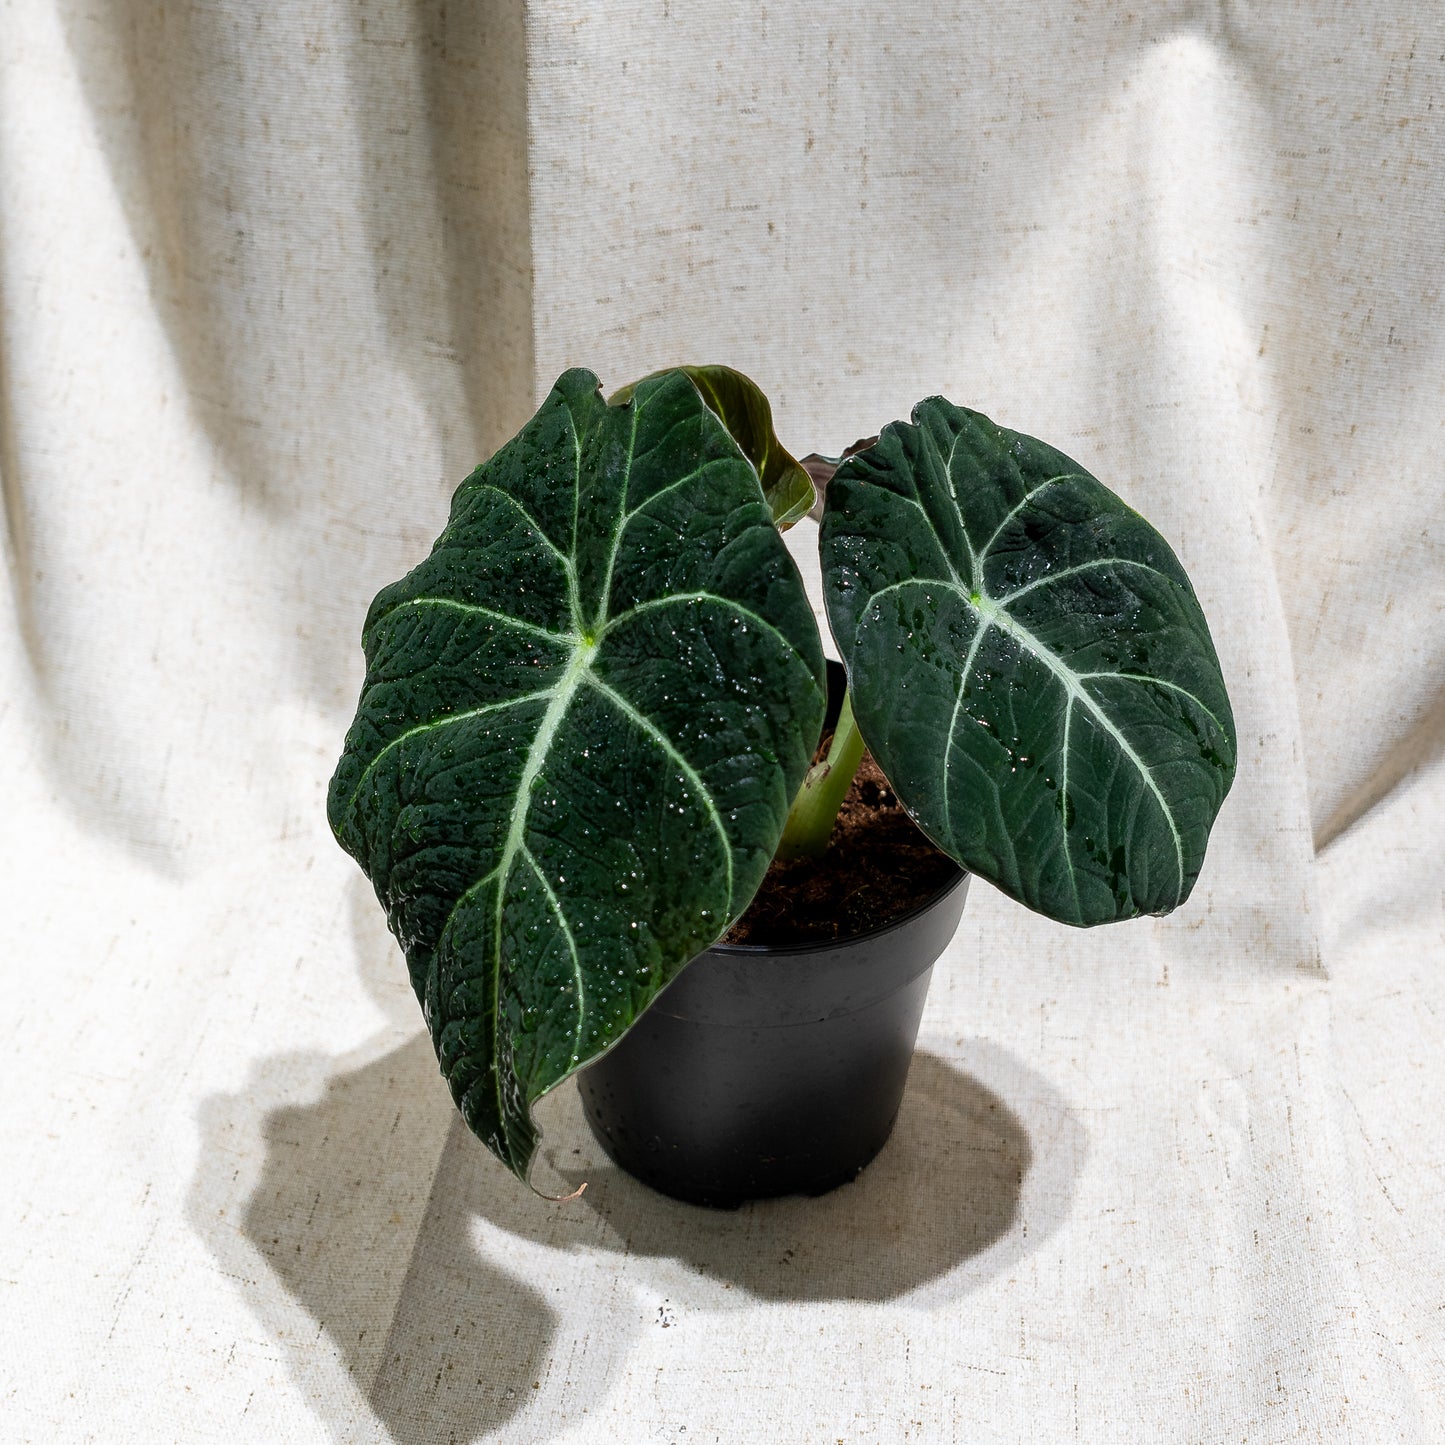 Elephant Ear, Black Velvet Alocasia, Little Queen (Alocasia reginula) in a 5 inch pot. Indoor plant for sale by Promise Supply for delivery and pickup in Toronto